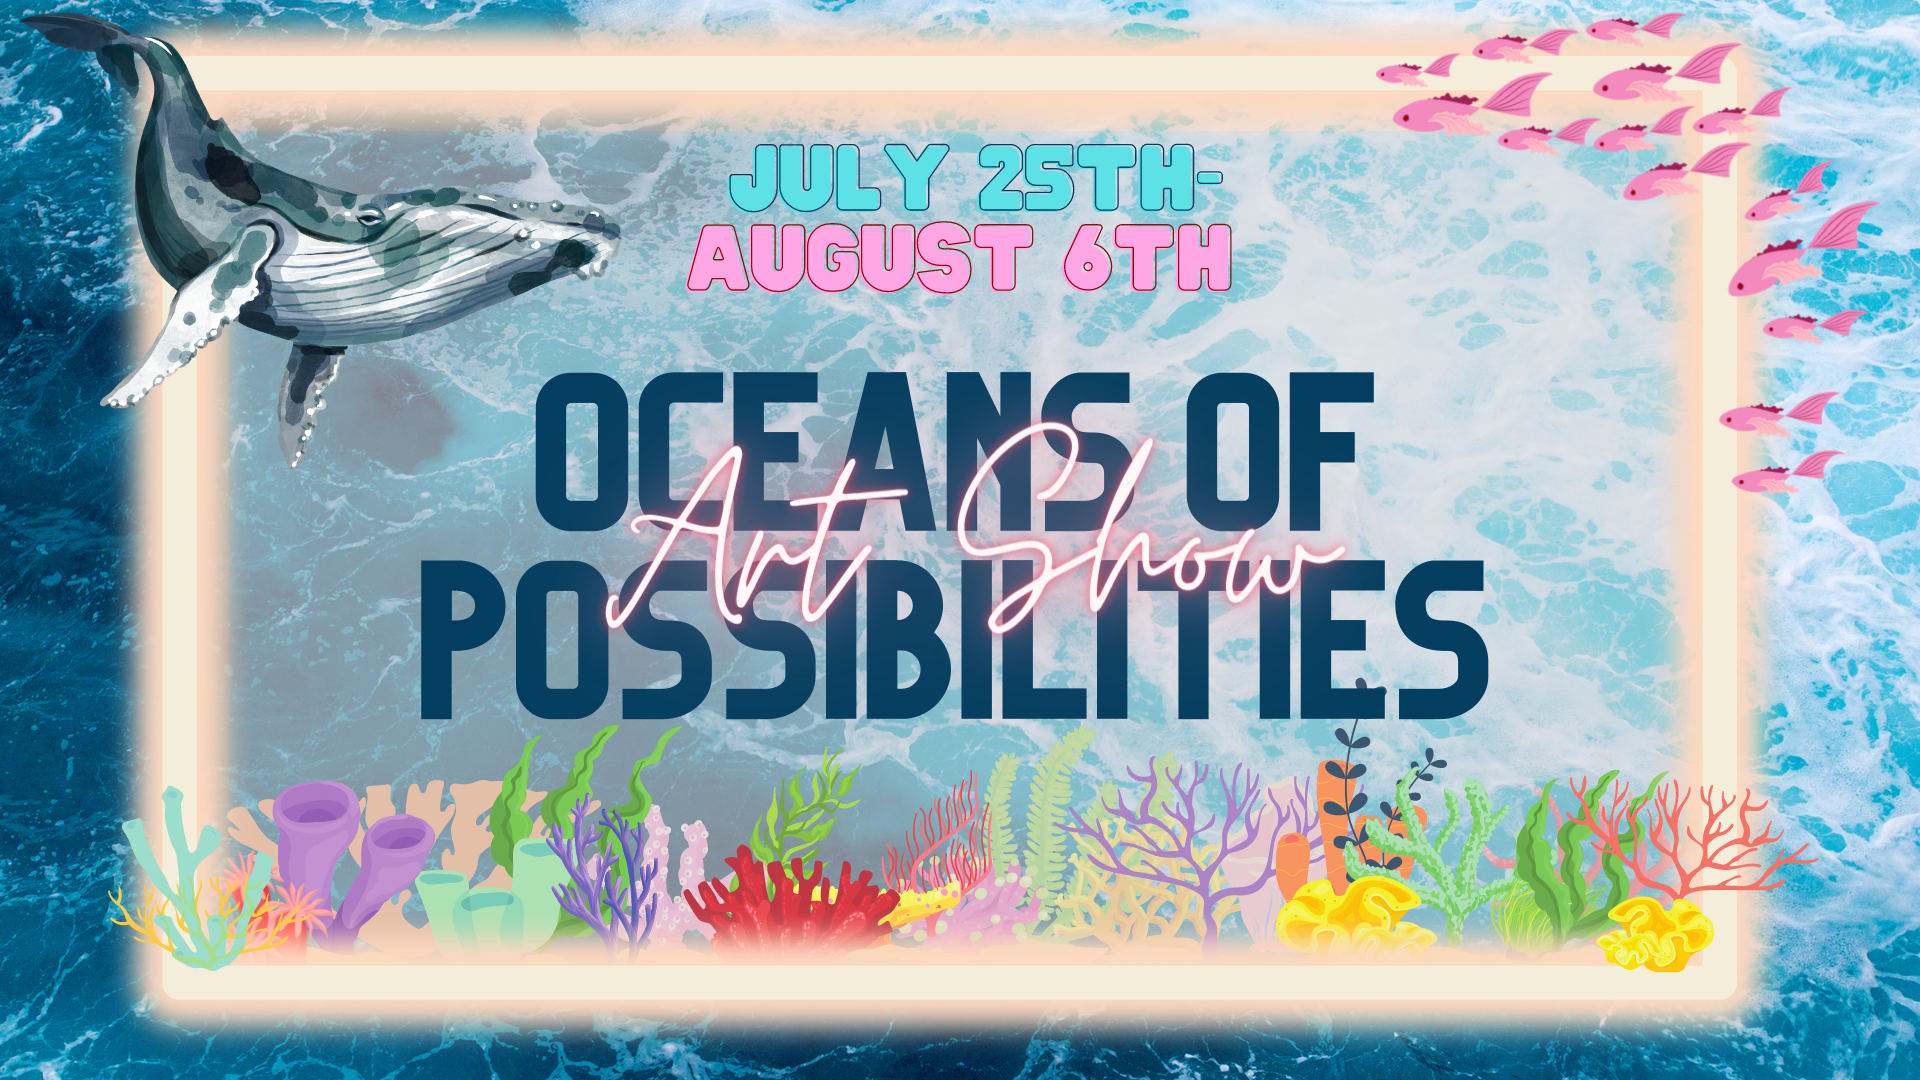 July 25 through August 6, Oceans of Possibilities Art Show